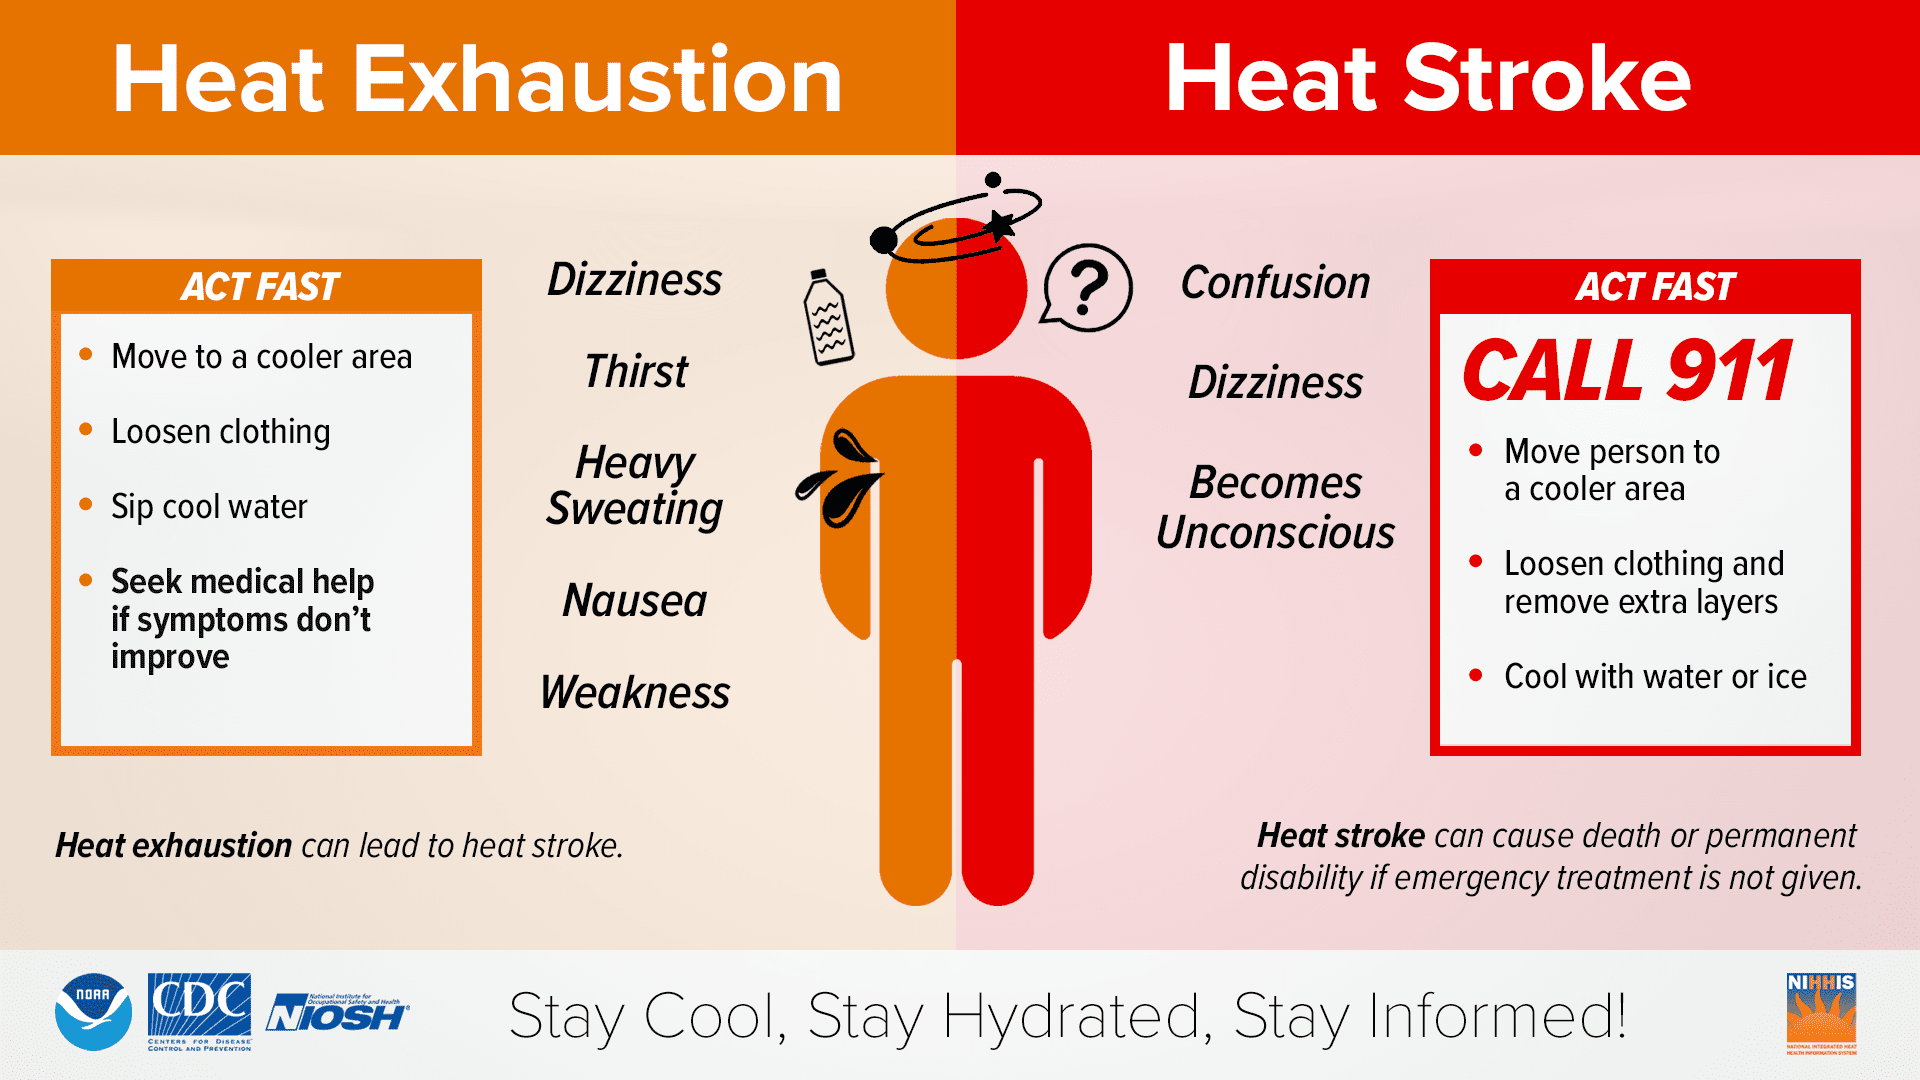 Graphic compares Heat Exhaustion and Heat Stroke. Things to look out for in heat exhaustion are dizziness, thirst, heavy sweating, nausea, and weakness. If someone is experiencing these symptoms, move them to a cooler area, loosen clothing, sip cool water, and seek medical help if symptoms do not improve. Signs of heat stroke include confusion, dizziness, or becoming unconscious. Heat exhaustion can lead to heat stroke. If someone is experiencing these symptoms, you need to act fast. Call 9-1-1 immediately. Move the person to a cooler area, loosen or remove layers of clothing, and cool them with water or ice. Heat stroke can cause death or permanent disability if emergency treatment is not immediately given. Graphic created by NWS, CDC, and NiOSH.